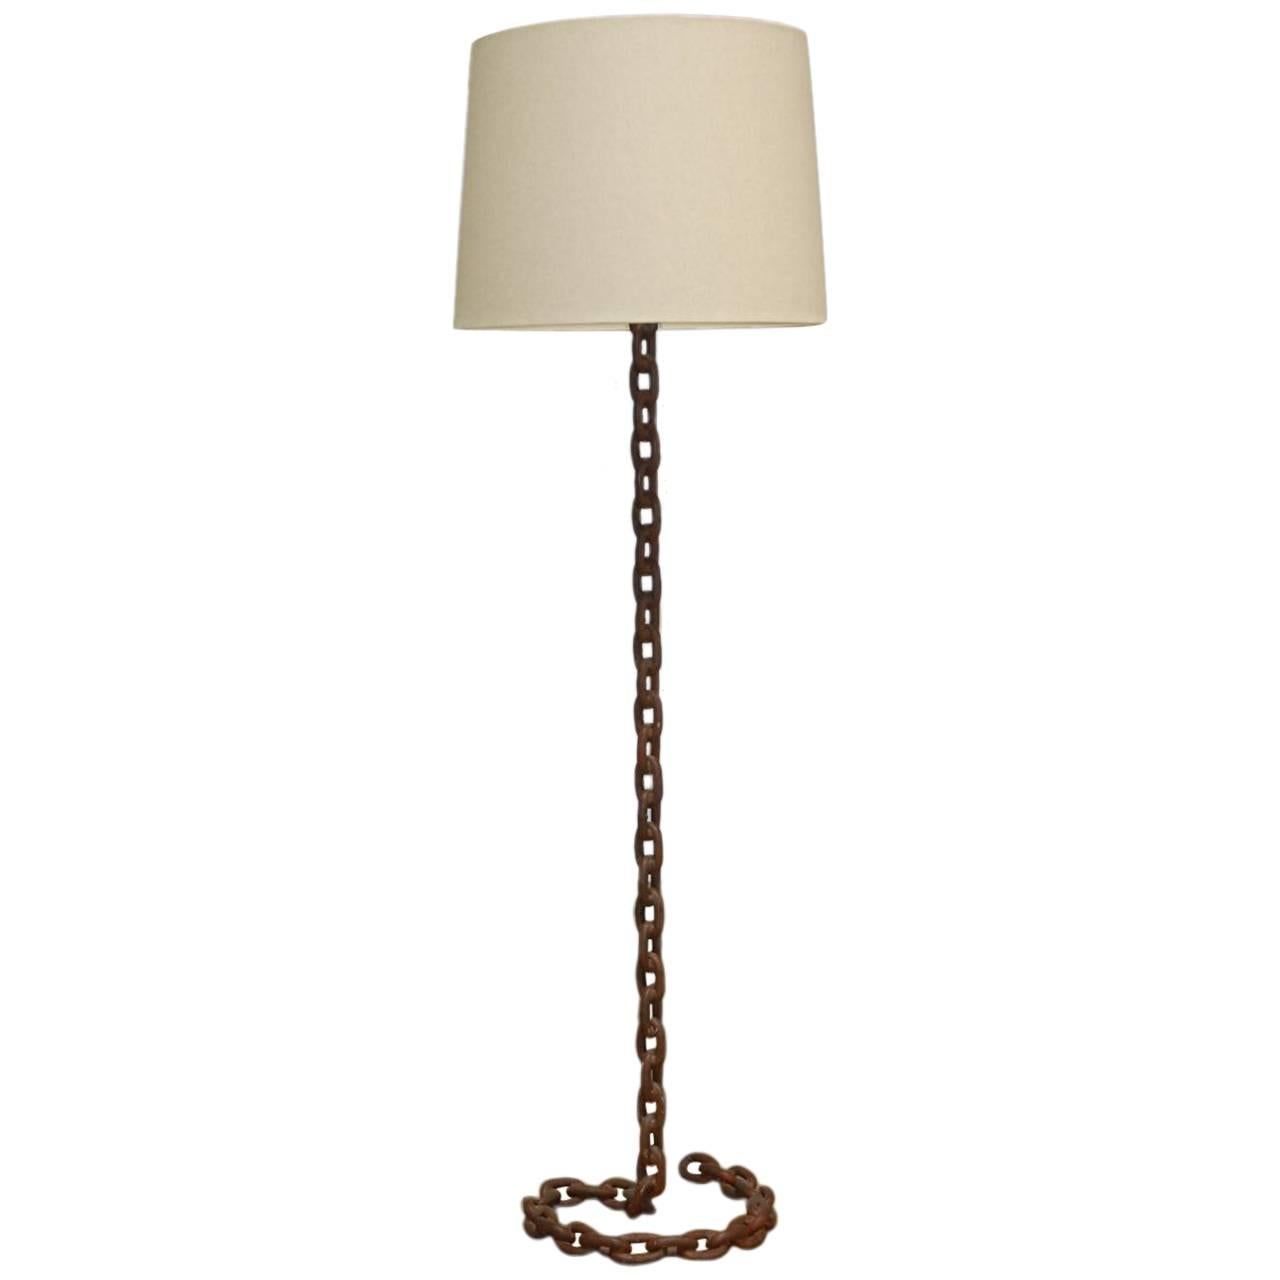 Nautical Iron Chain-Link Floor Lamp by Barry Dixon for Arteriors